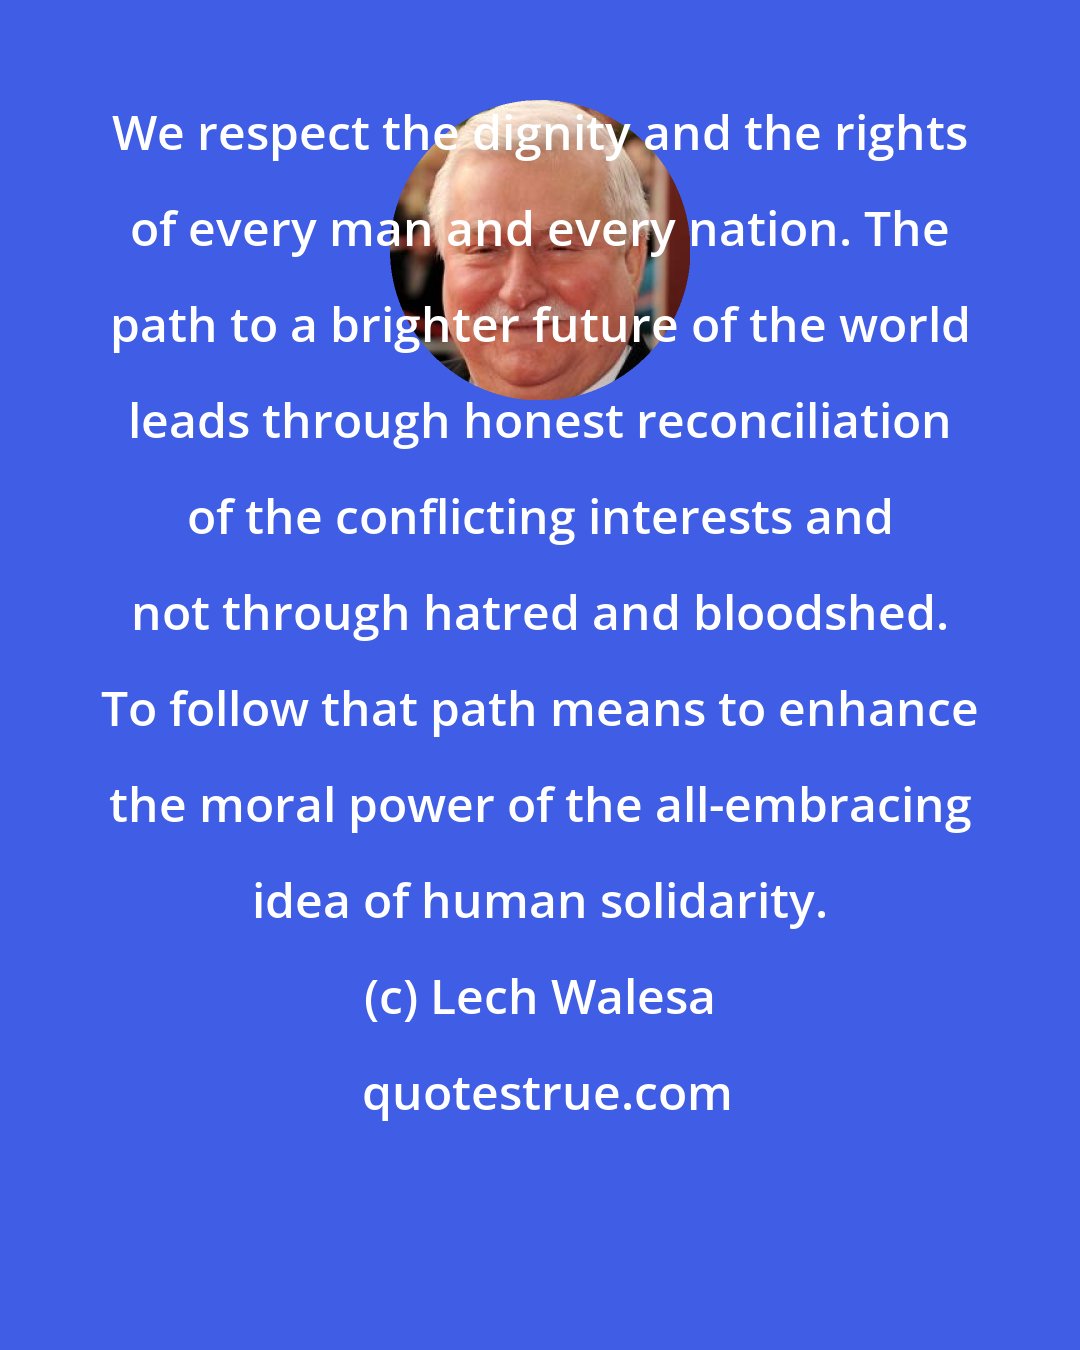 Lech Walesa: We respect the dignity and the rights of every man and every nation. The path to a brighter future of the world leads through honest reconciliation of the conflicting interests and not through hatred and bloodshed. To follow that path means to enhance the moral power of the all-embracing idea of human solidarity.